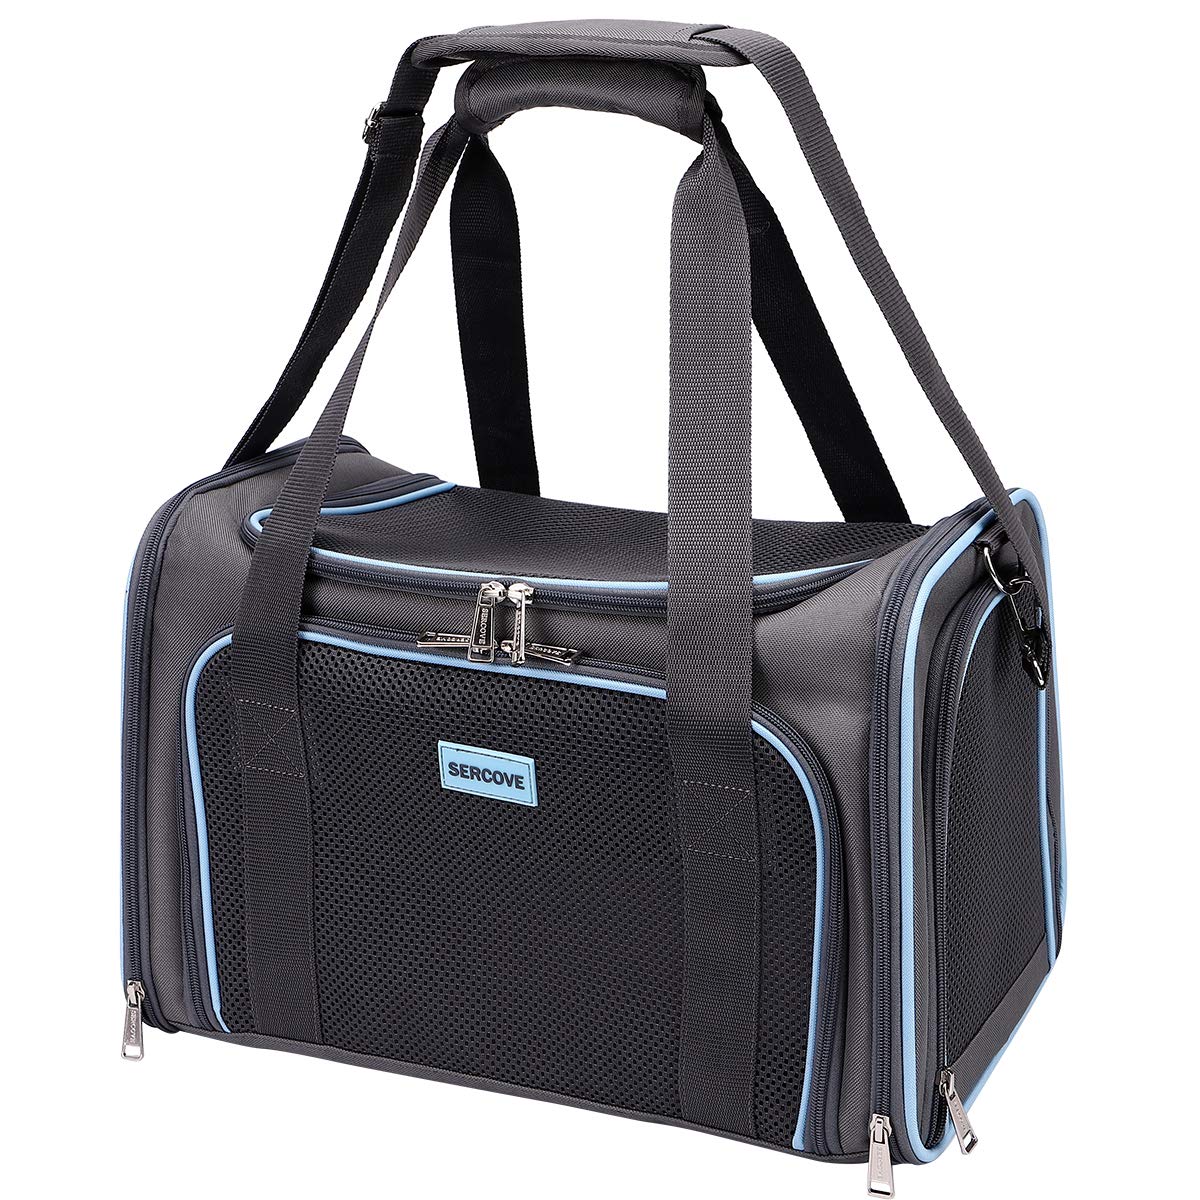 SERCOVE Travel Cat Carriers Airline Approved